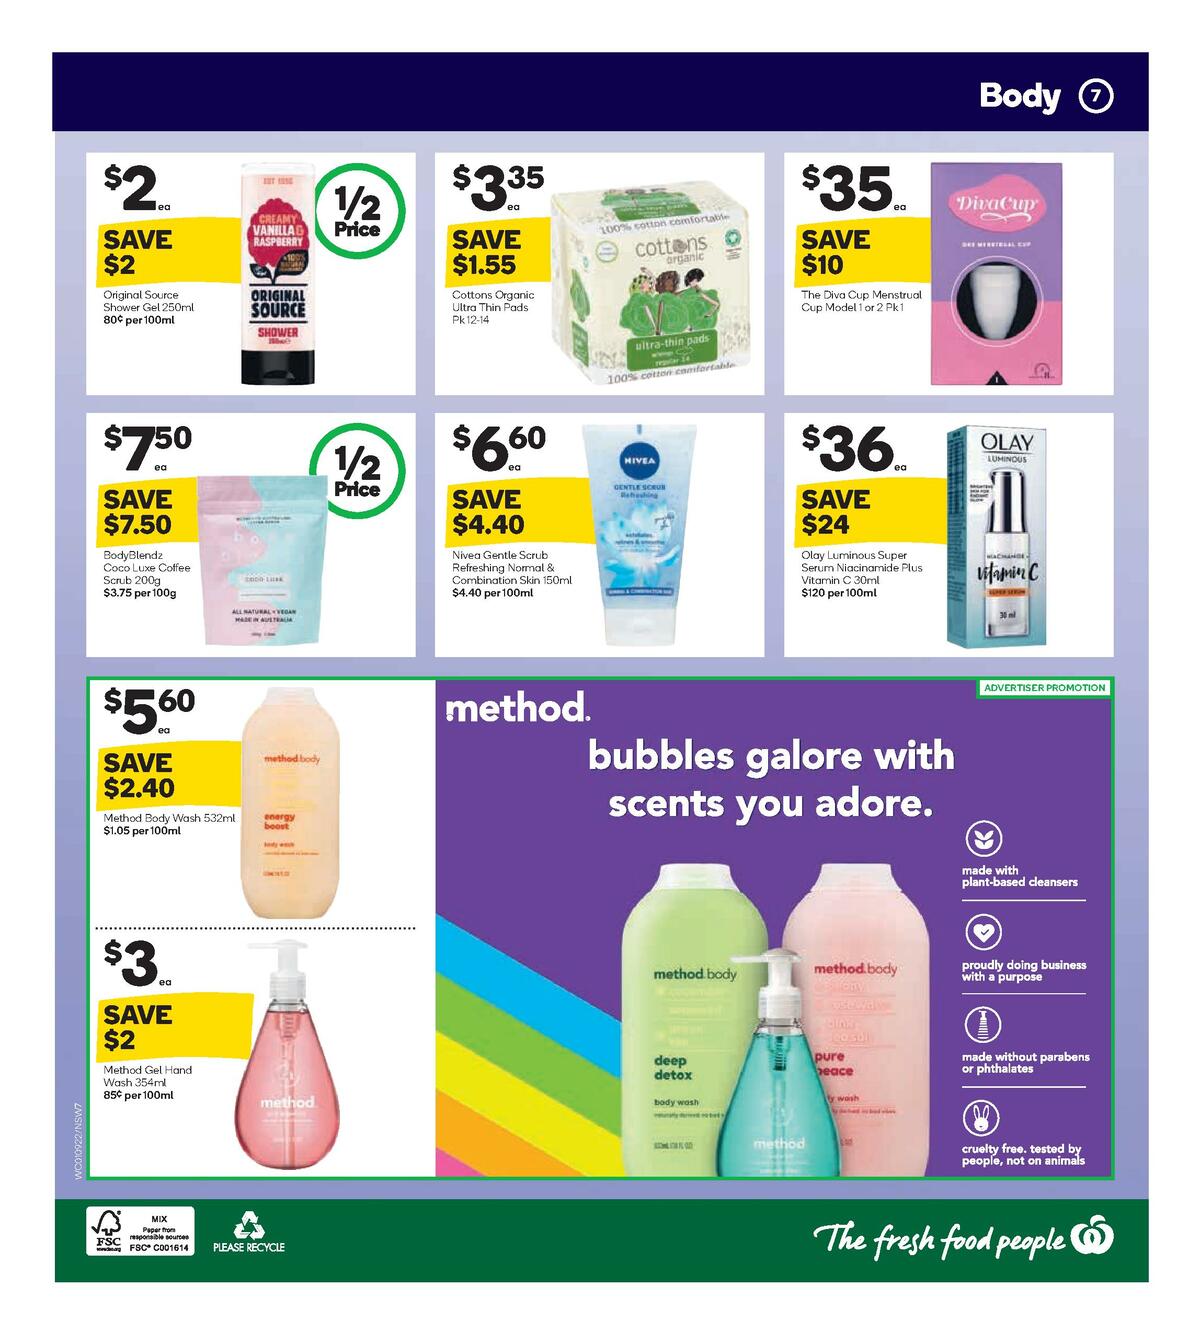 Woolworths Spring Health & Beauty Catalogues from 1 September